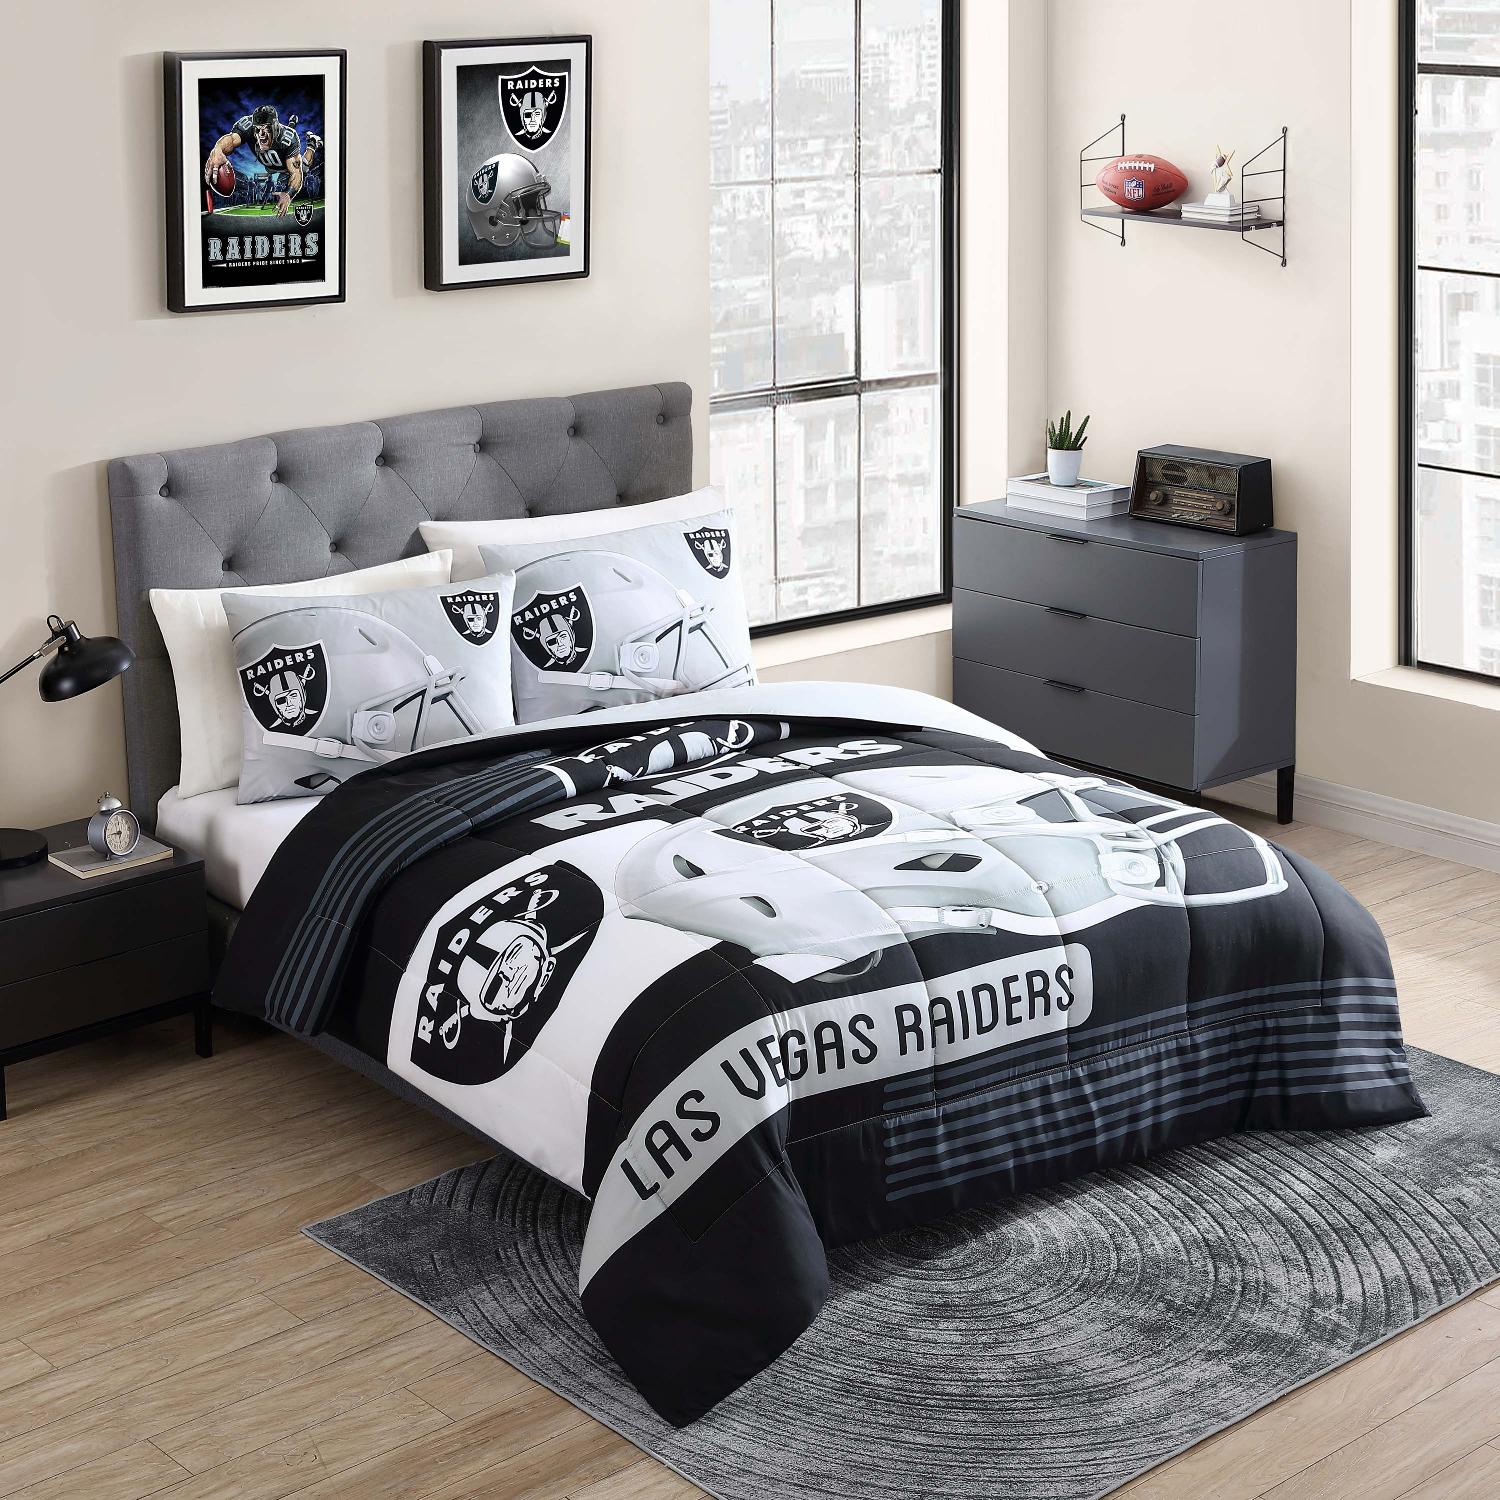 Las Vegas Raiders NFL Officially Licensed 3-Piece Comforter Set - Bed